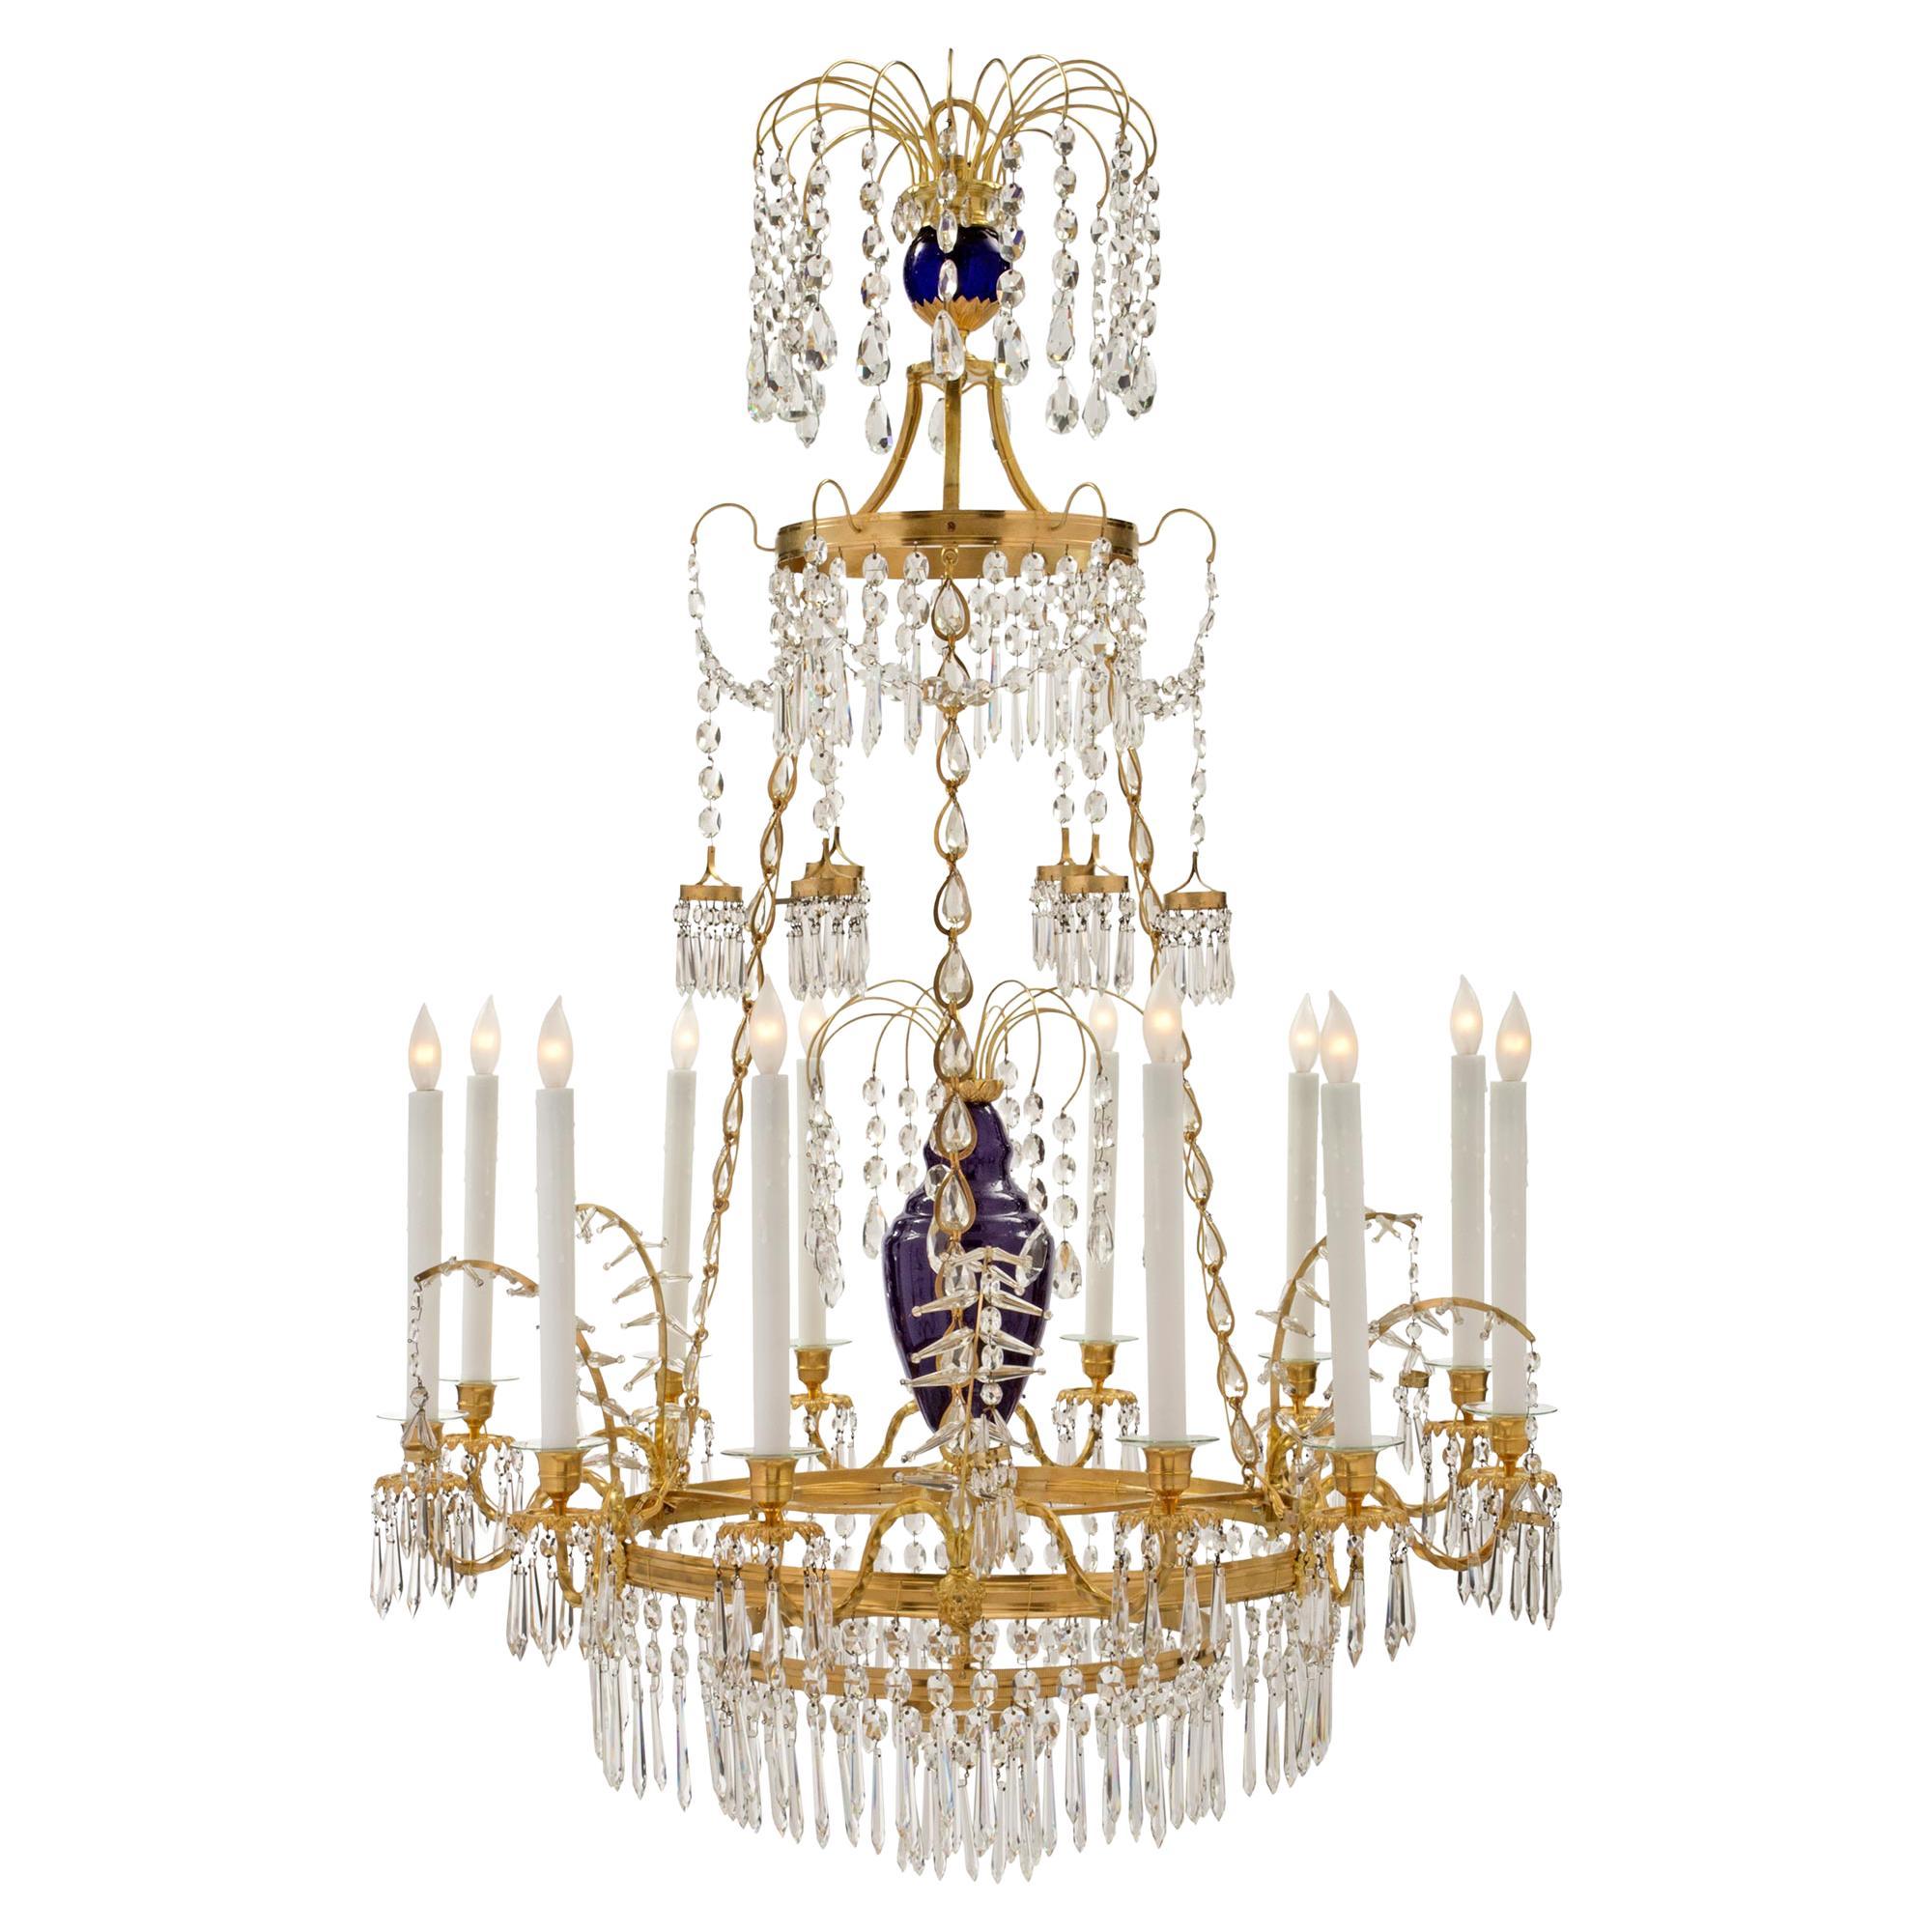 Russian 19th Century Neoclassical Style Glass, Crystal and Ormolu Chandelier